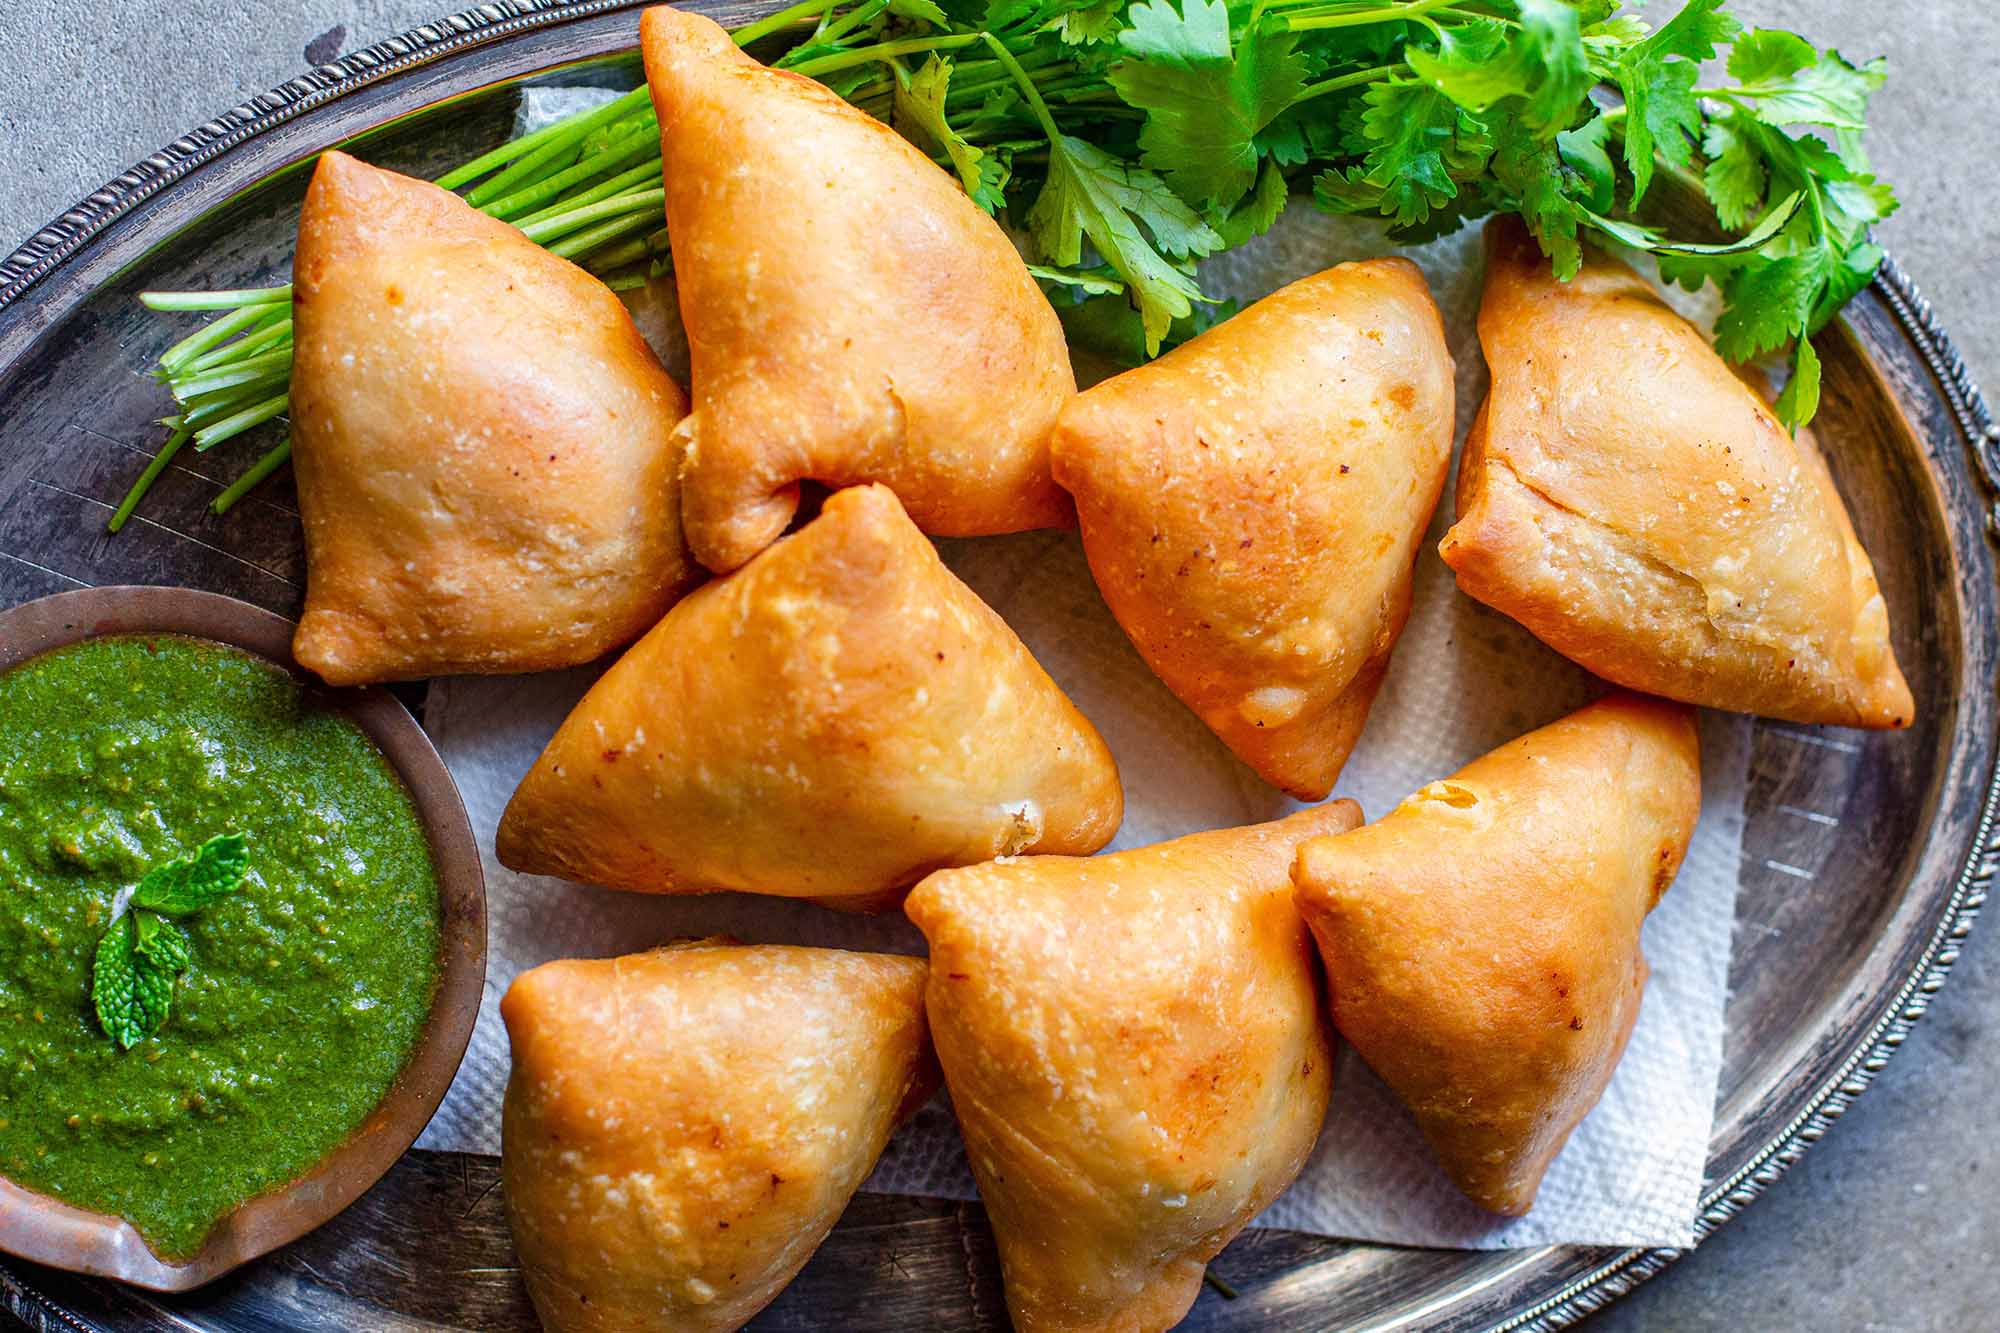 Vegetarian Samosas on a bed of herbs with one samosa filled with potato and peas alongside a cilantro mint chutney or dipping sauce in a small wooden bowl..